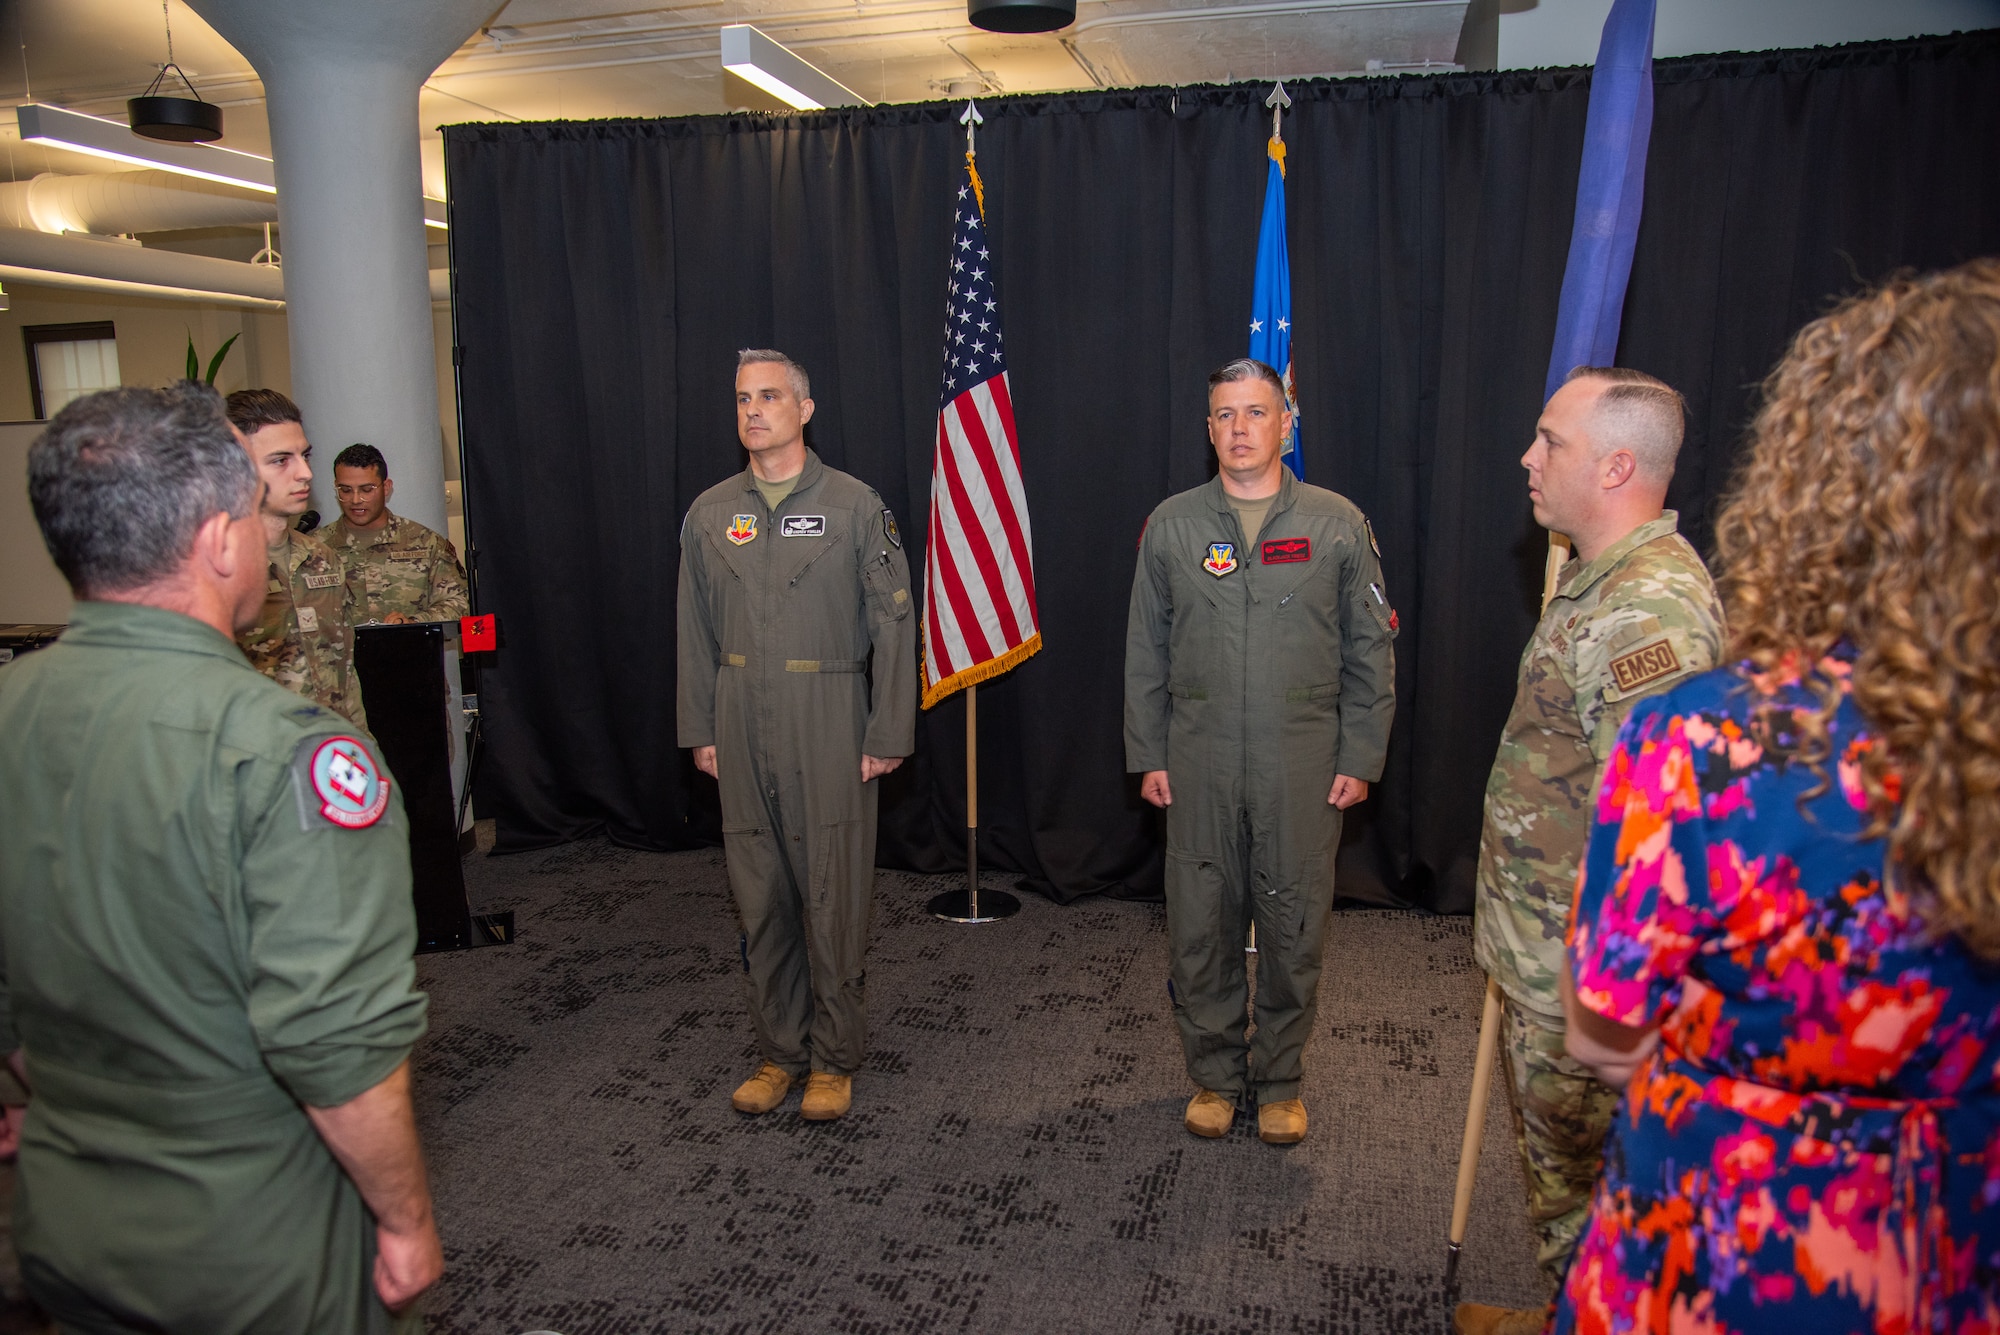 U.S. Air Force Col. Andrew J. Finkler, 850th Spectrum Warfare Group commander, left, and U.S. Air Force Lt. Col. Charles A. Friesz, 563rd Electronic Warfare Squadron commander, stand at attention as the new 563rd EWS guidon unfurls during the reactivation ceremony for 563rd EWS, San Antonio, Texas, April 25, 2024. The squadron was previously a as an electronic warfare and combat system officer training unit before it was deactivated in 2010. The 563rd EWS now performs software development to help modernize U.S. Air Force electronic warfare operations. (U.S. Air Force photo by Jarrod M. Vickers)